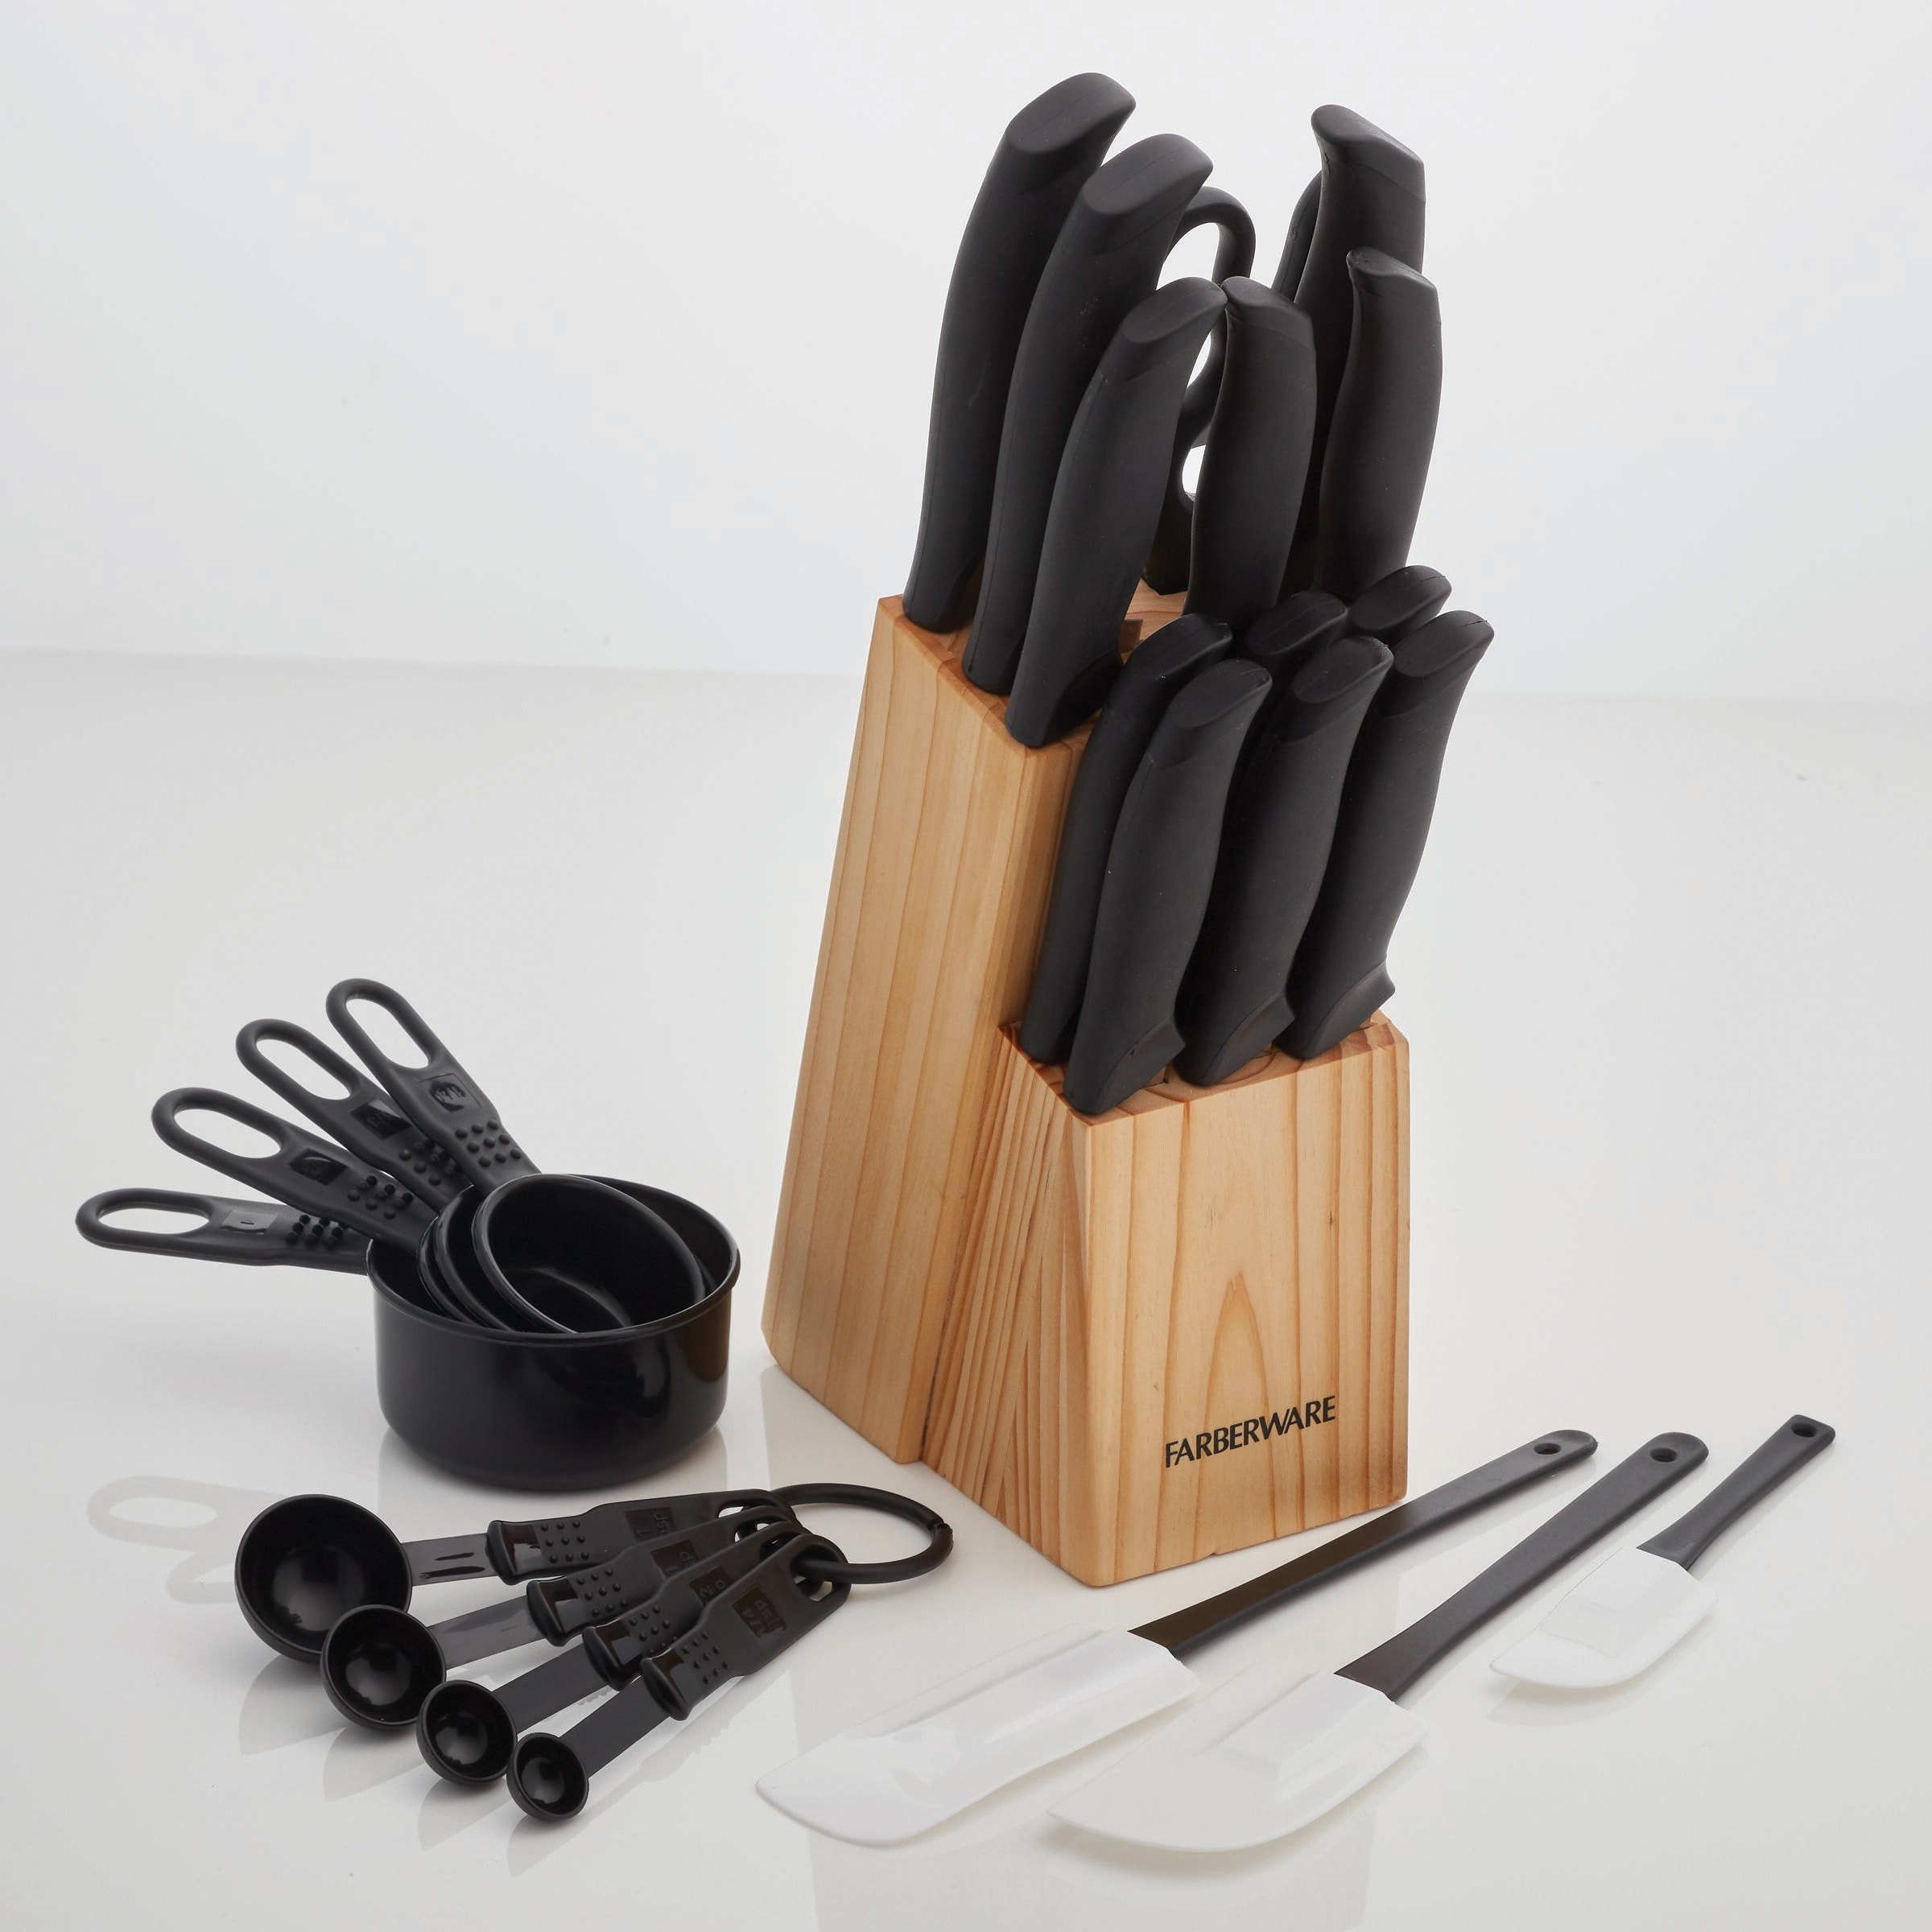 https://ak1.ostkcdn.com/images/products/is/images/direct/d8ad39b904b3f8679a23a09633359a50dbb26964/Farberware-25-Piece-Knife-Set-and-Kitchen-Tools-with-Block%2C-Black.jpg